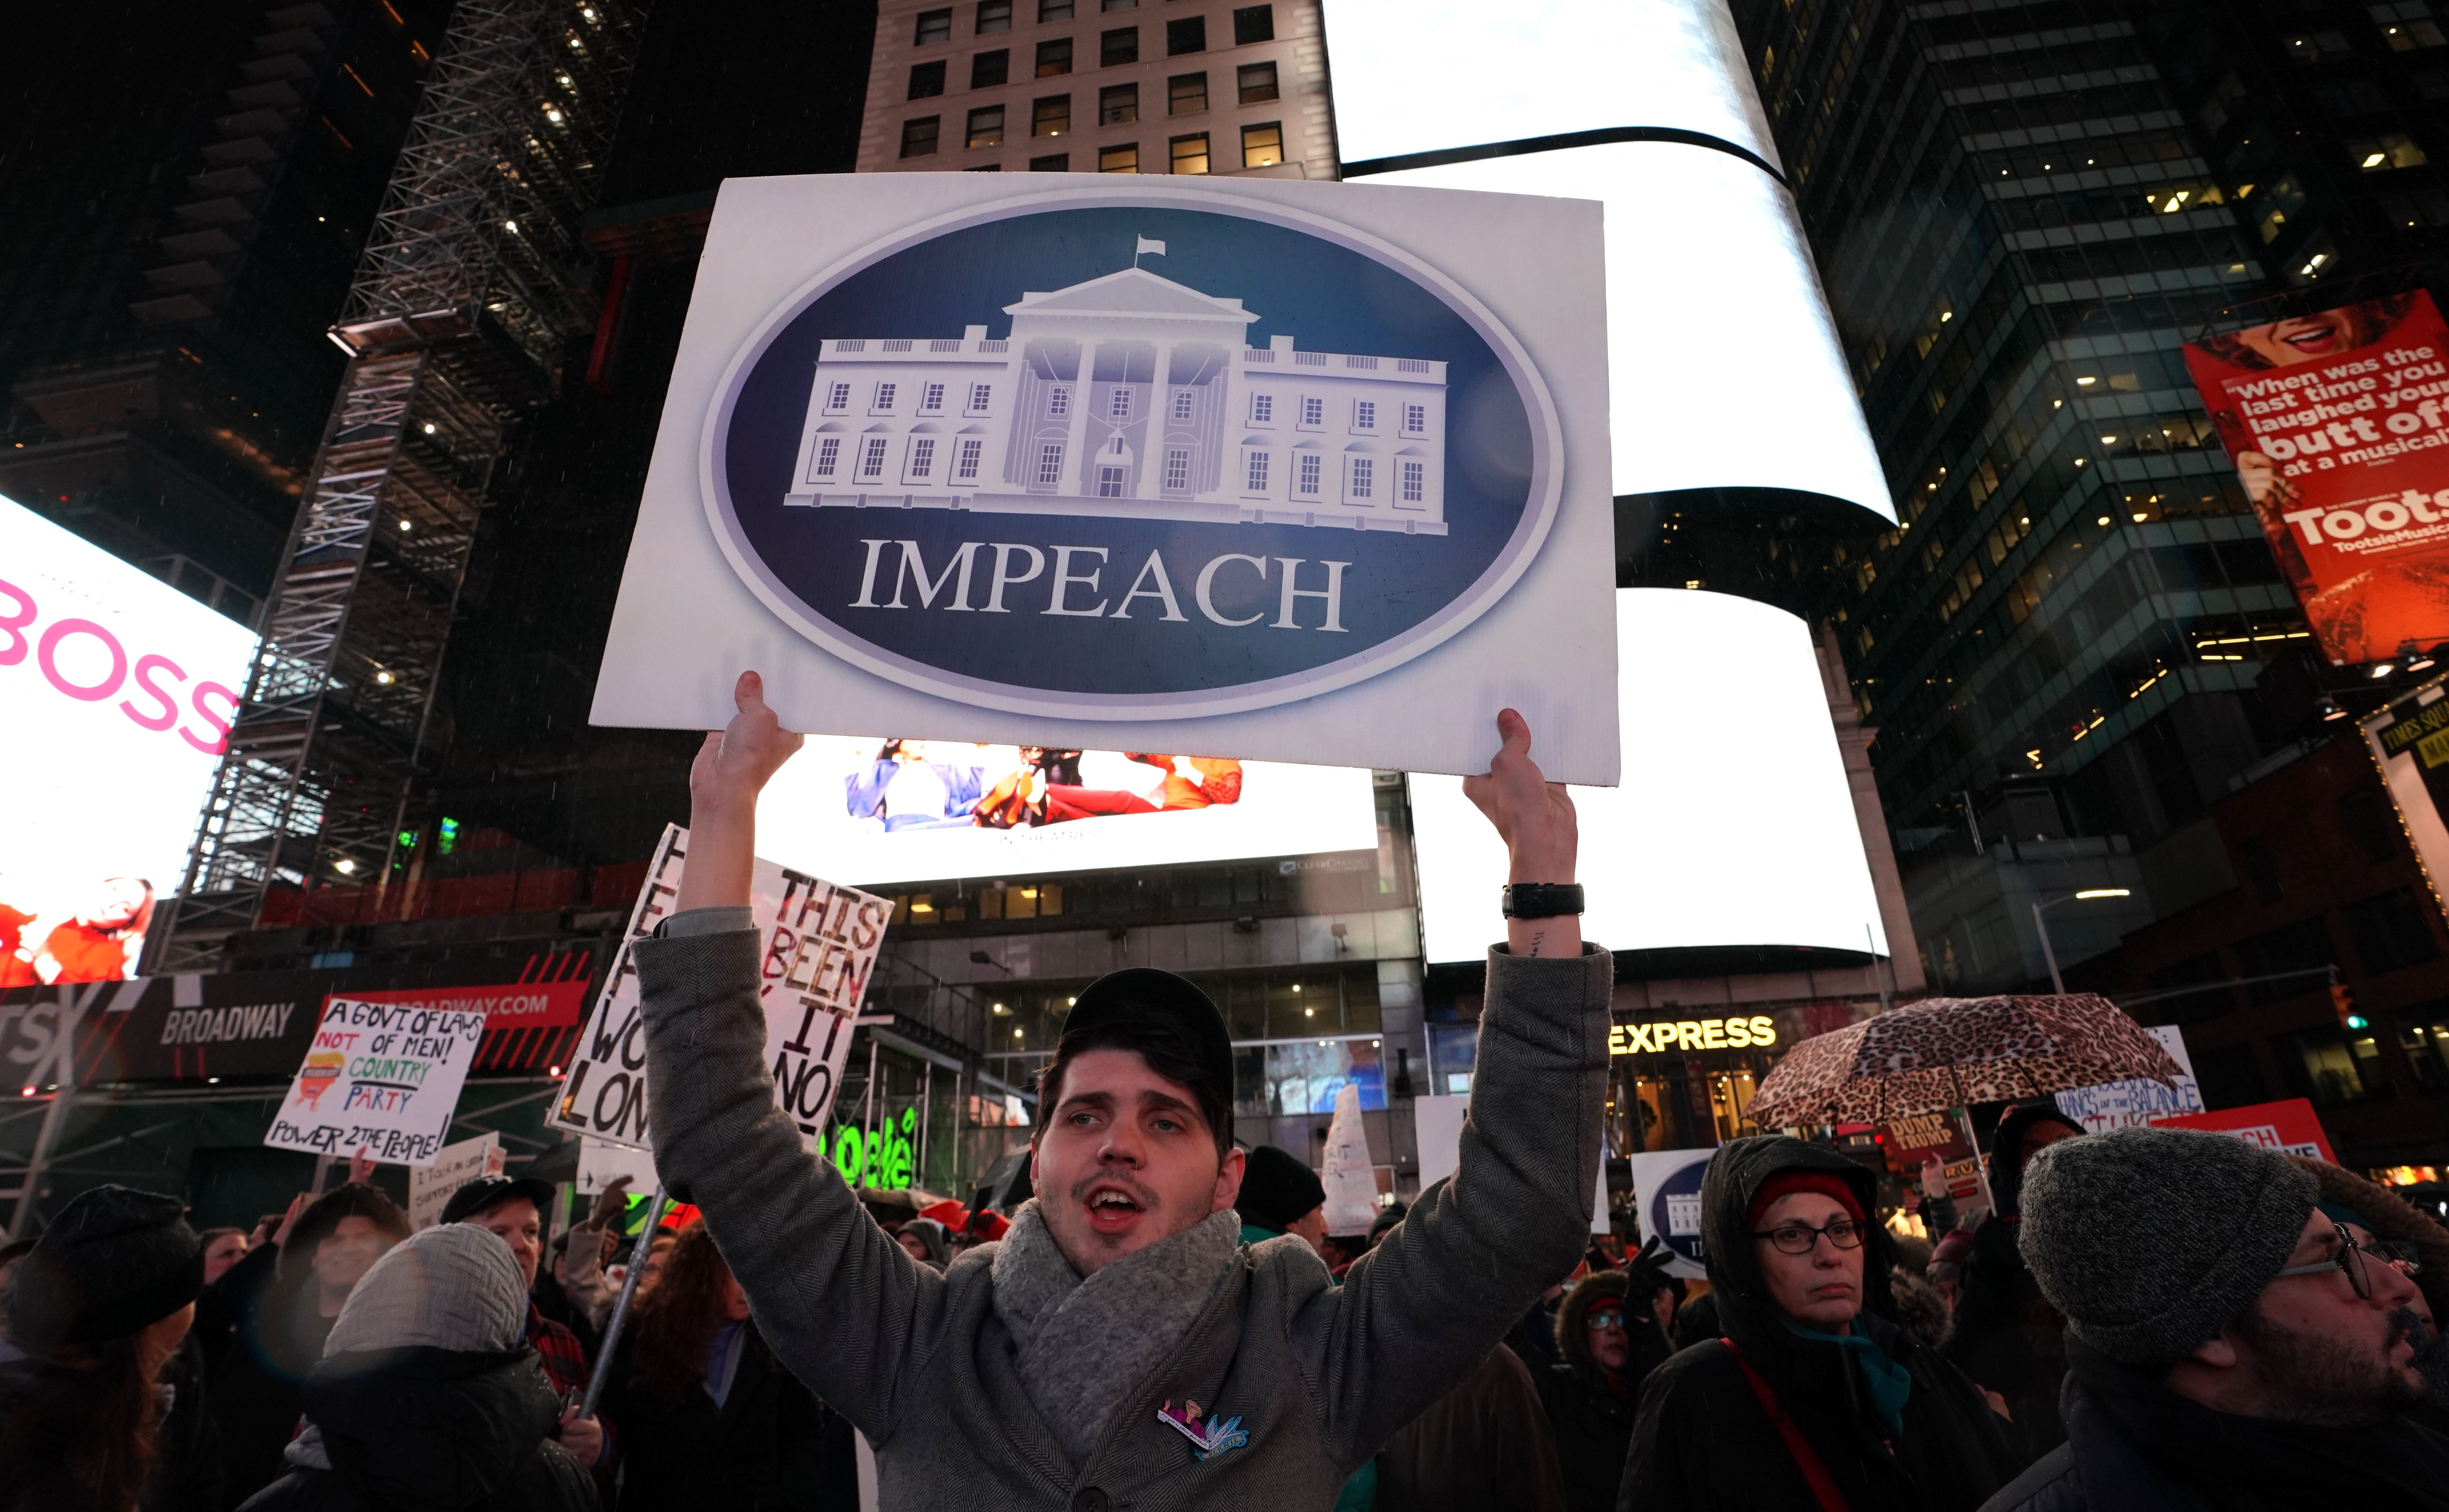 Protesters gather in Times Square on Tuesday to demand an end to Trump's presidency.